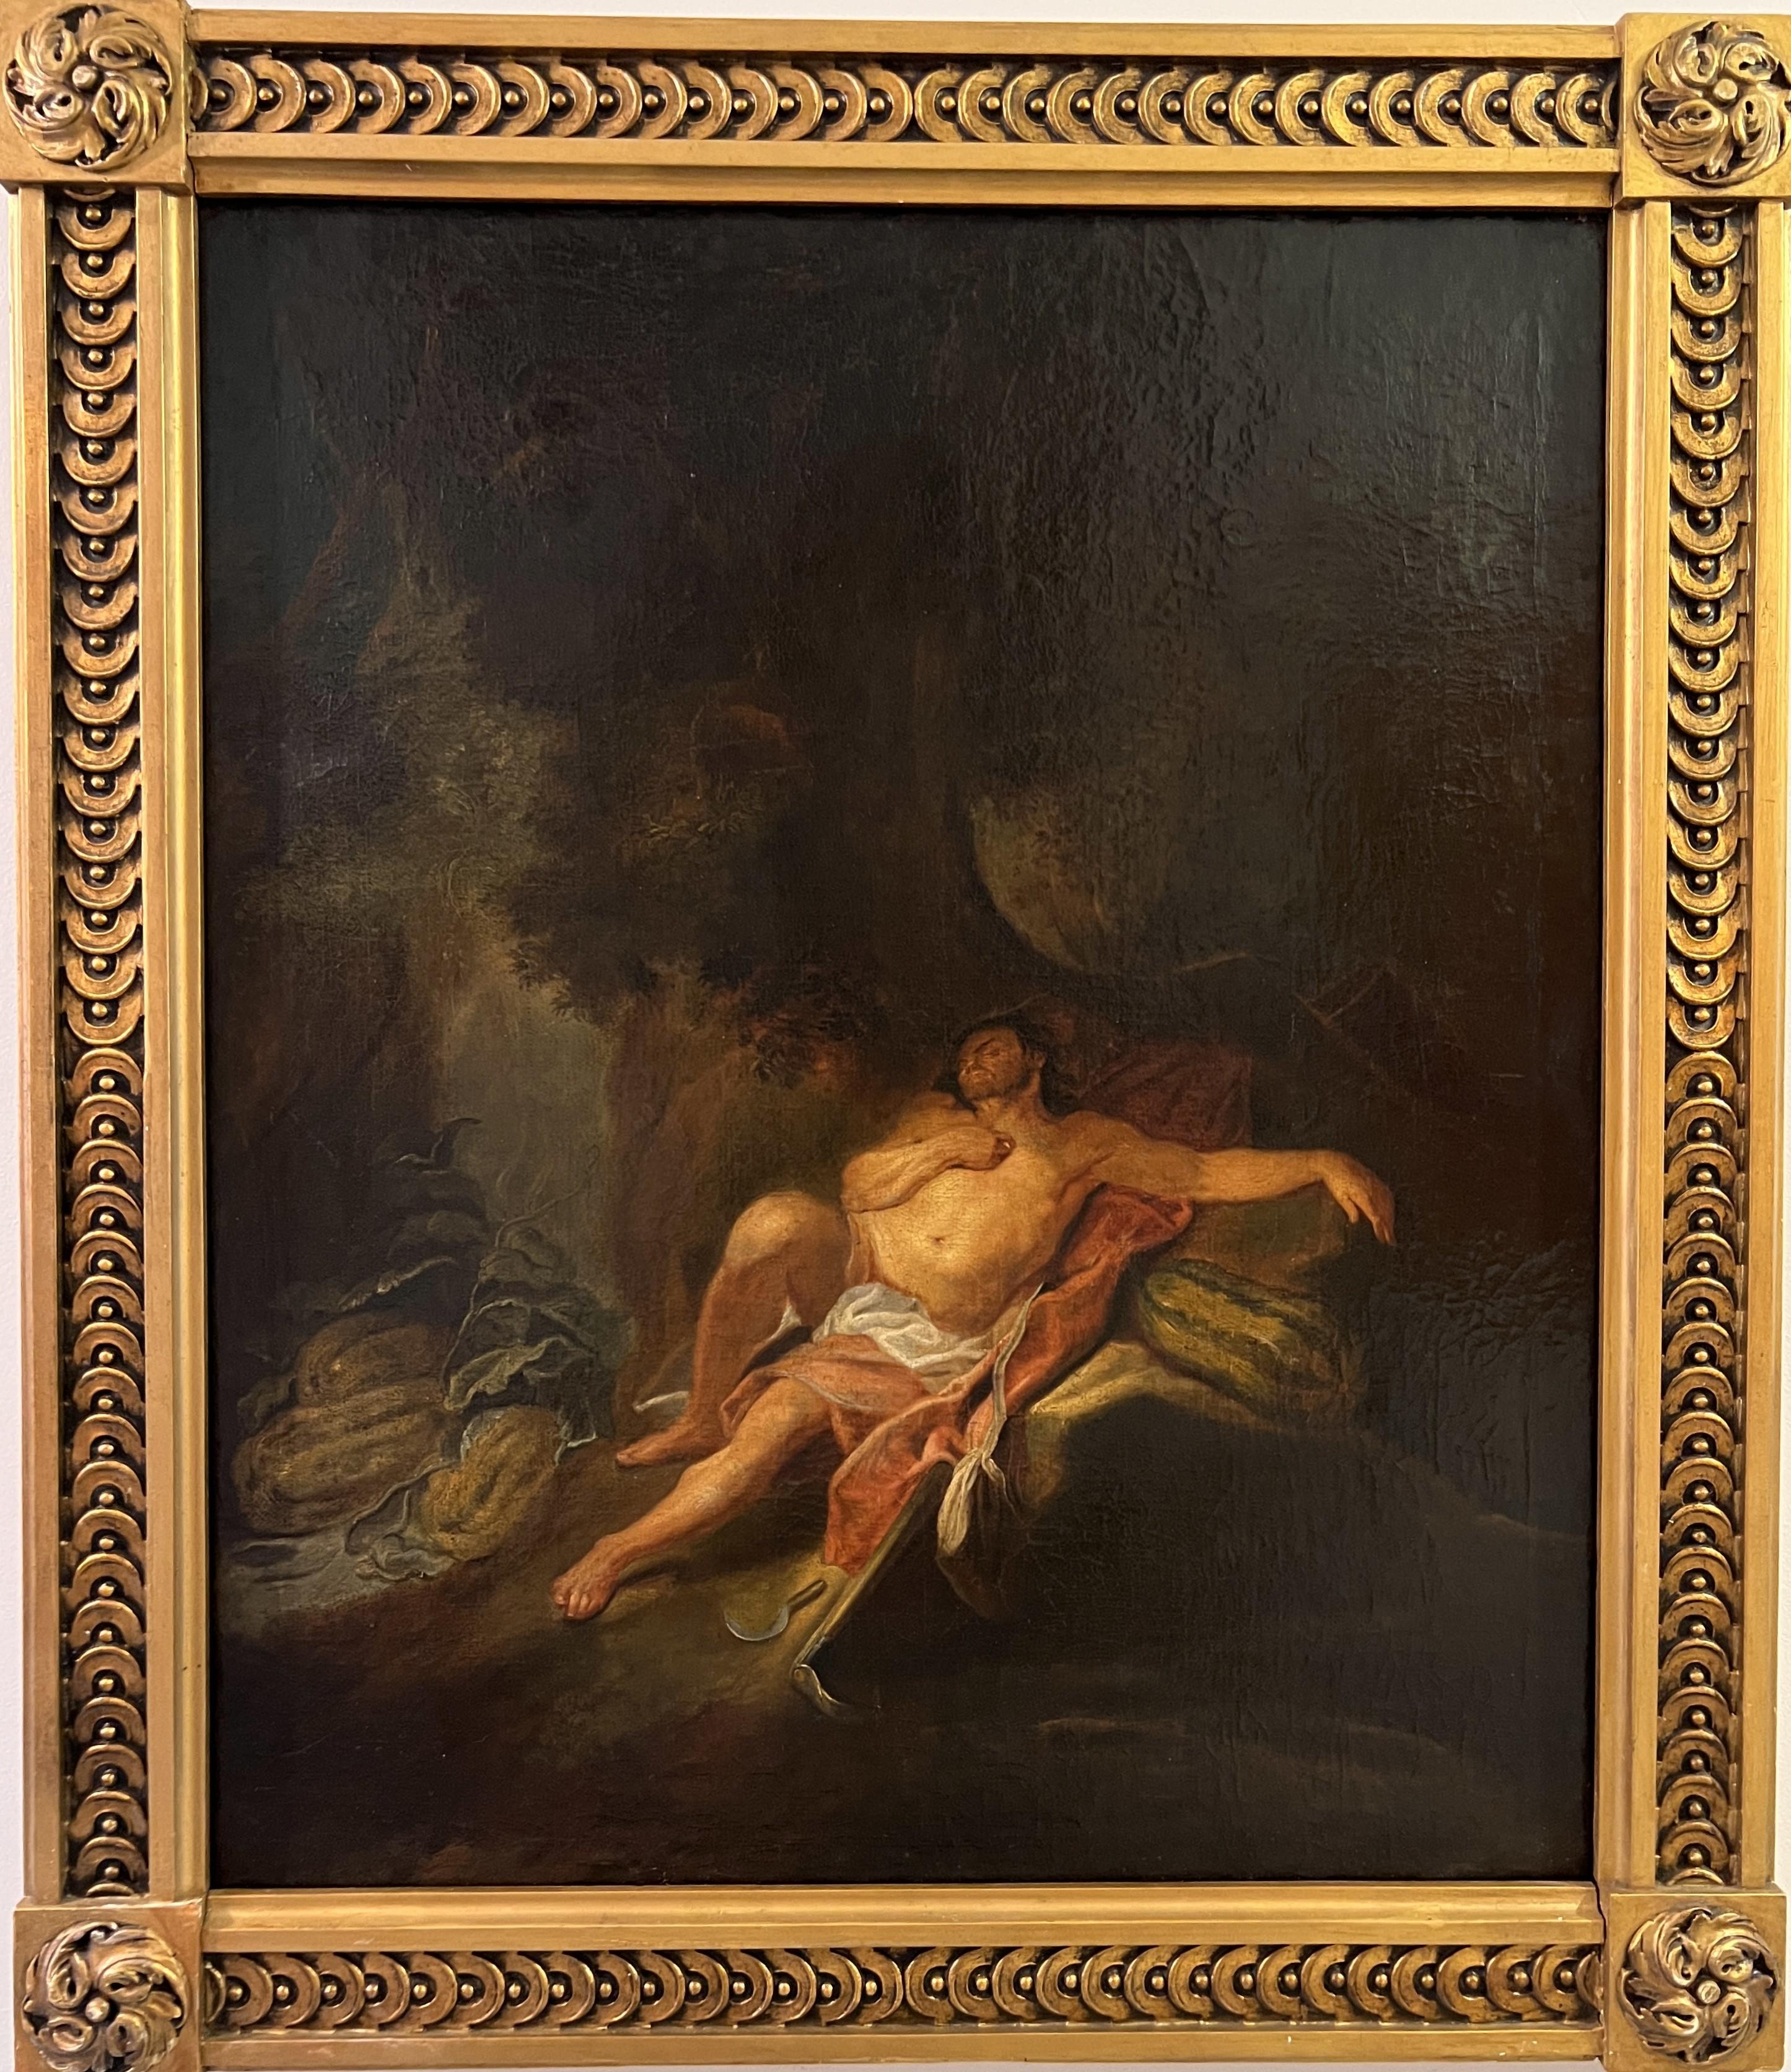 Unknown Portrait Painting - 18/19 C Antique Oil Painting on Canvas Herculean Figure Sleeping in a Landscape